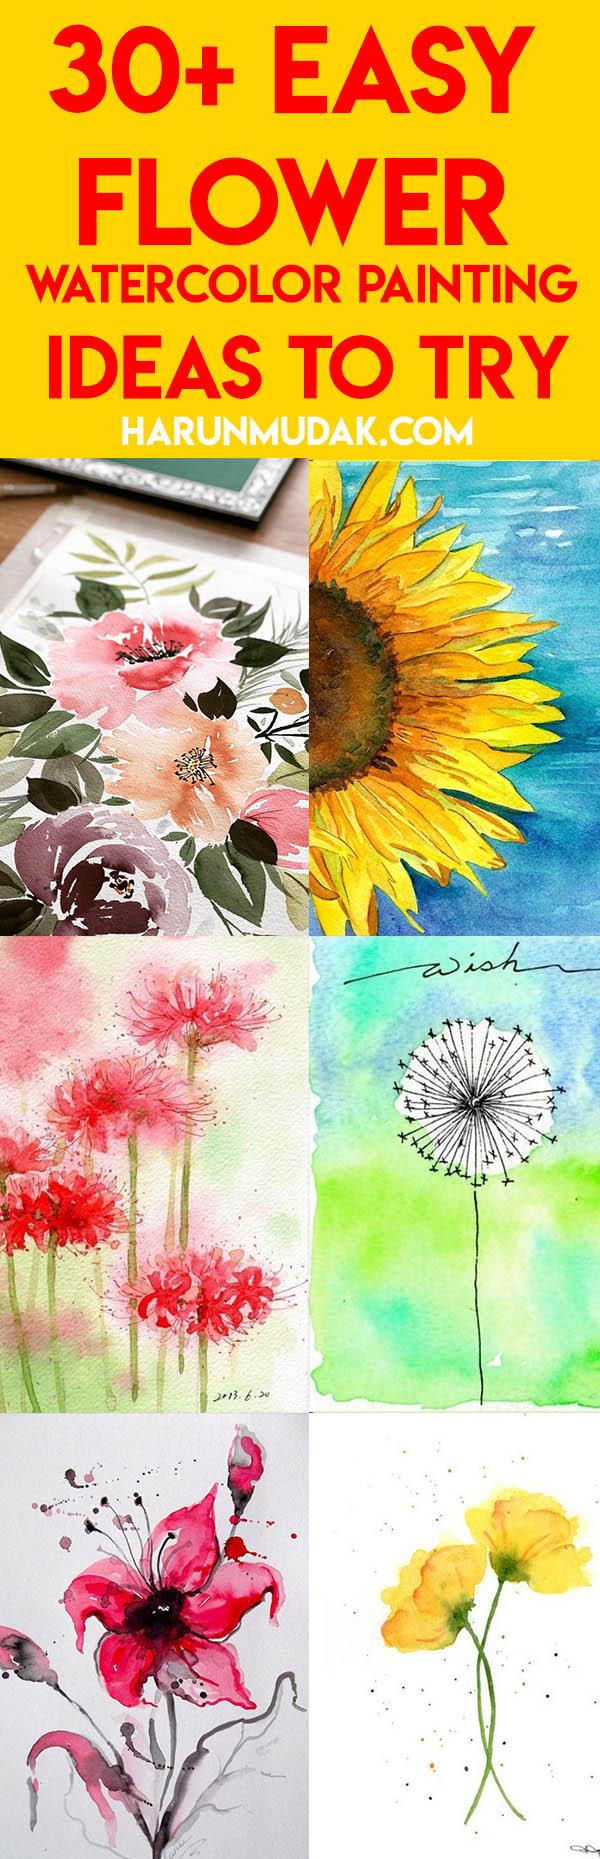 18 Easy DIY Art Projects You Can Make With Watercolors